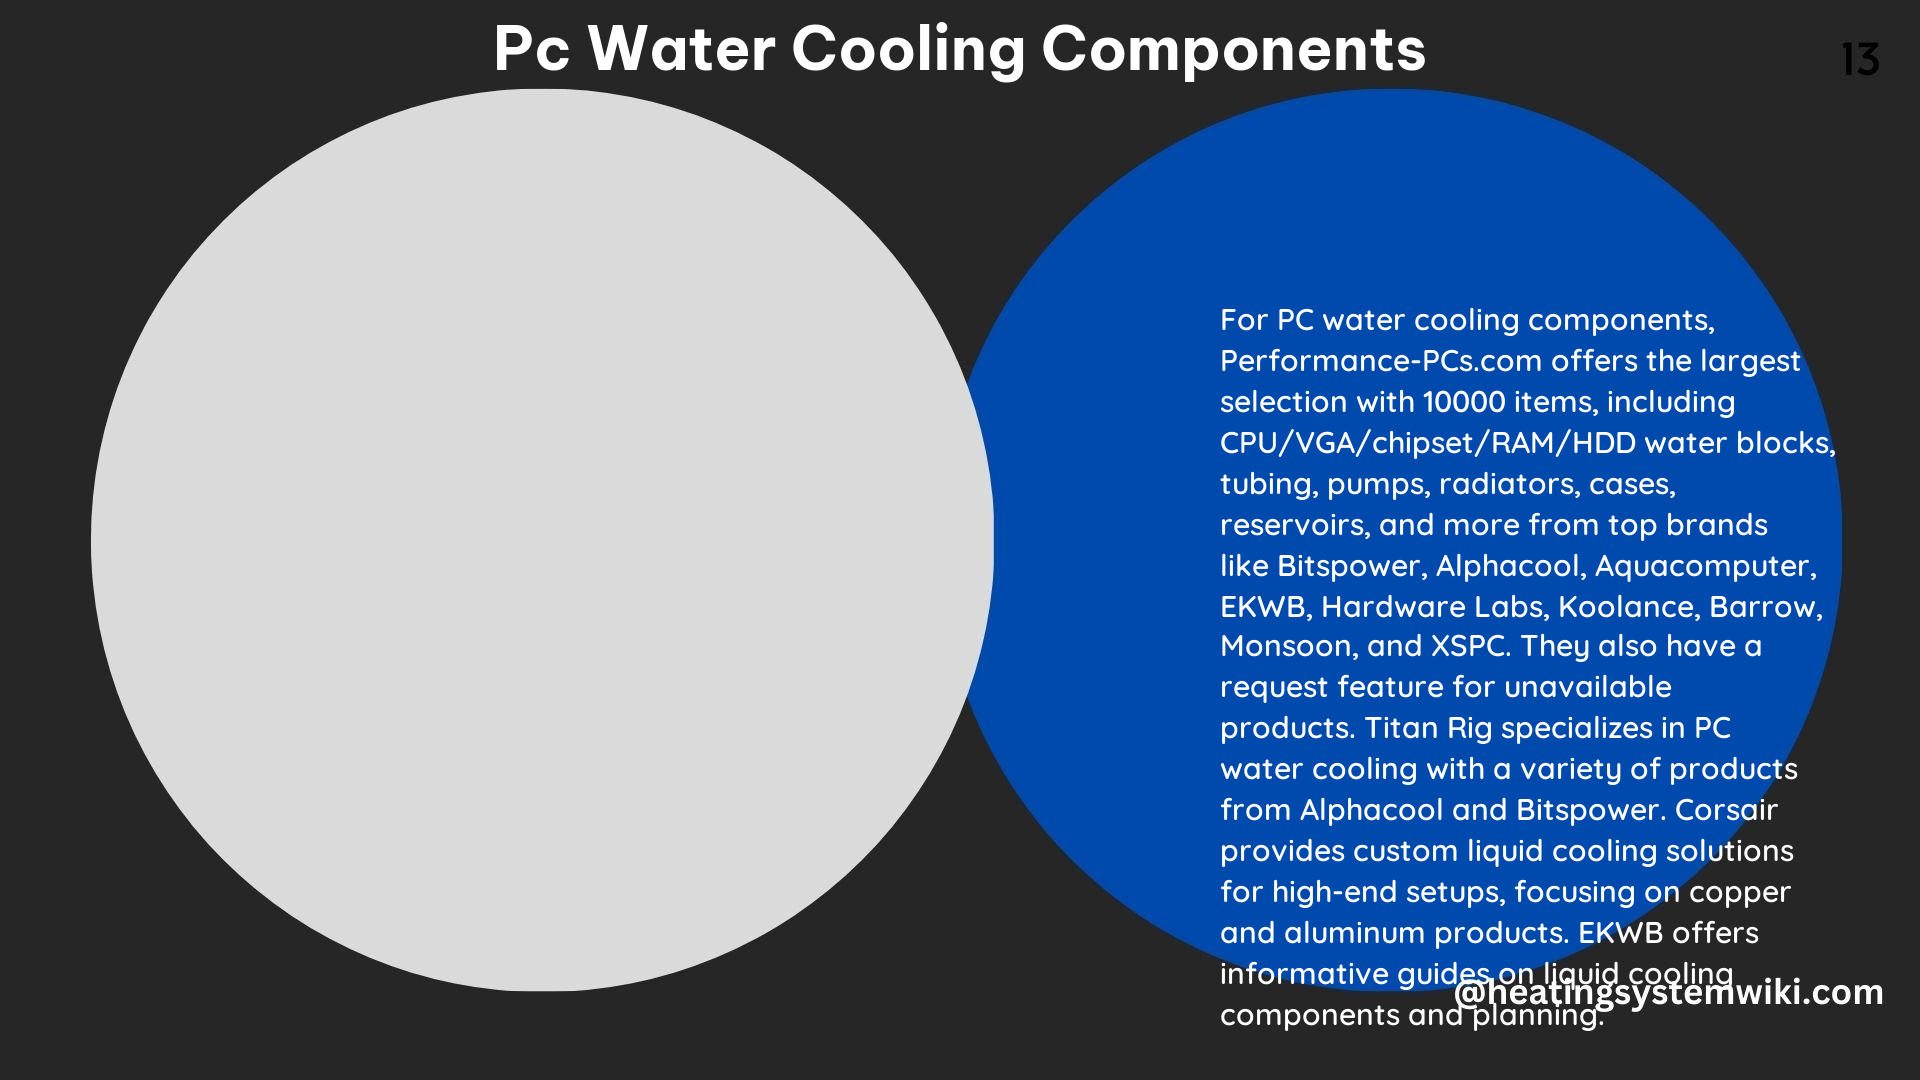 PC Water Cooling Components